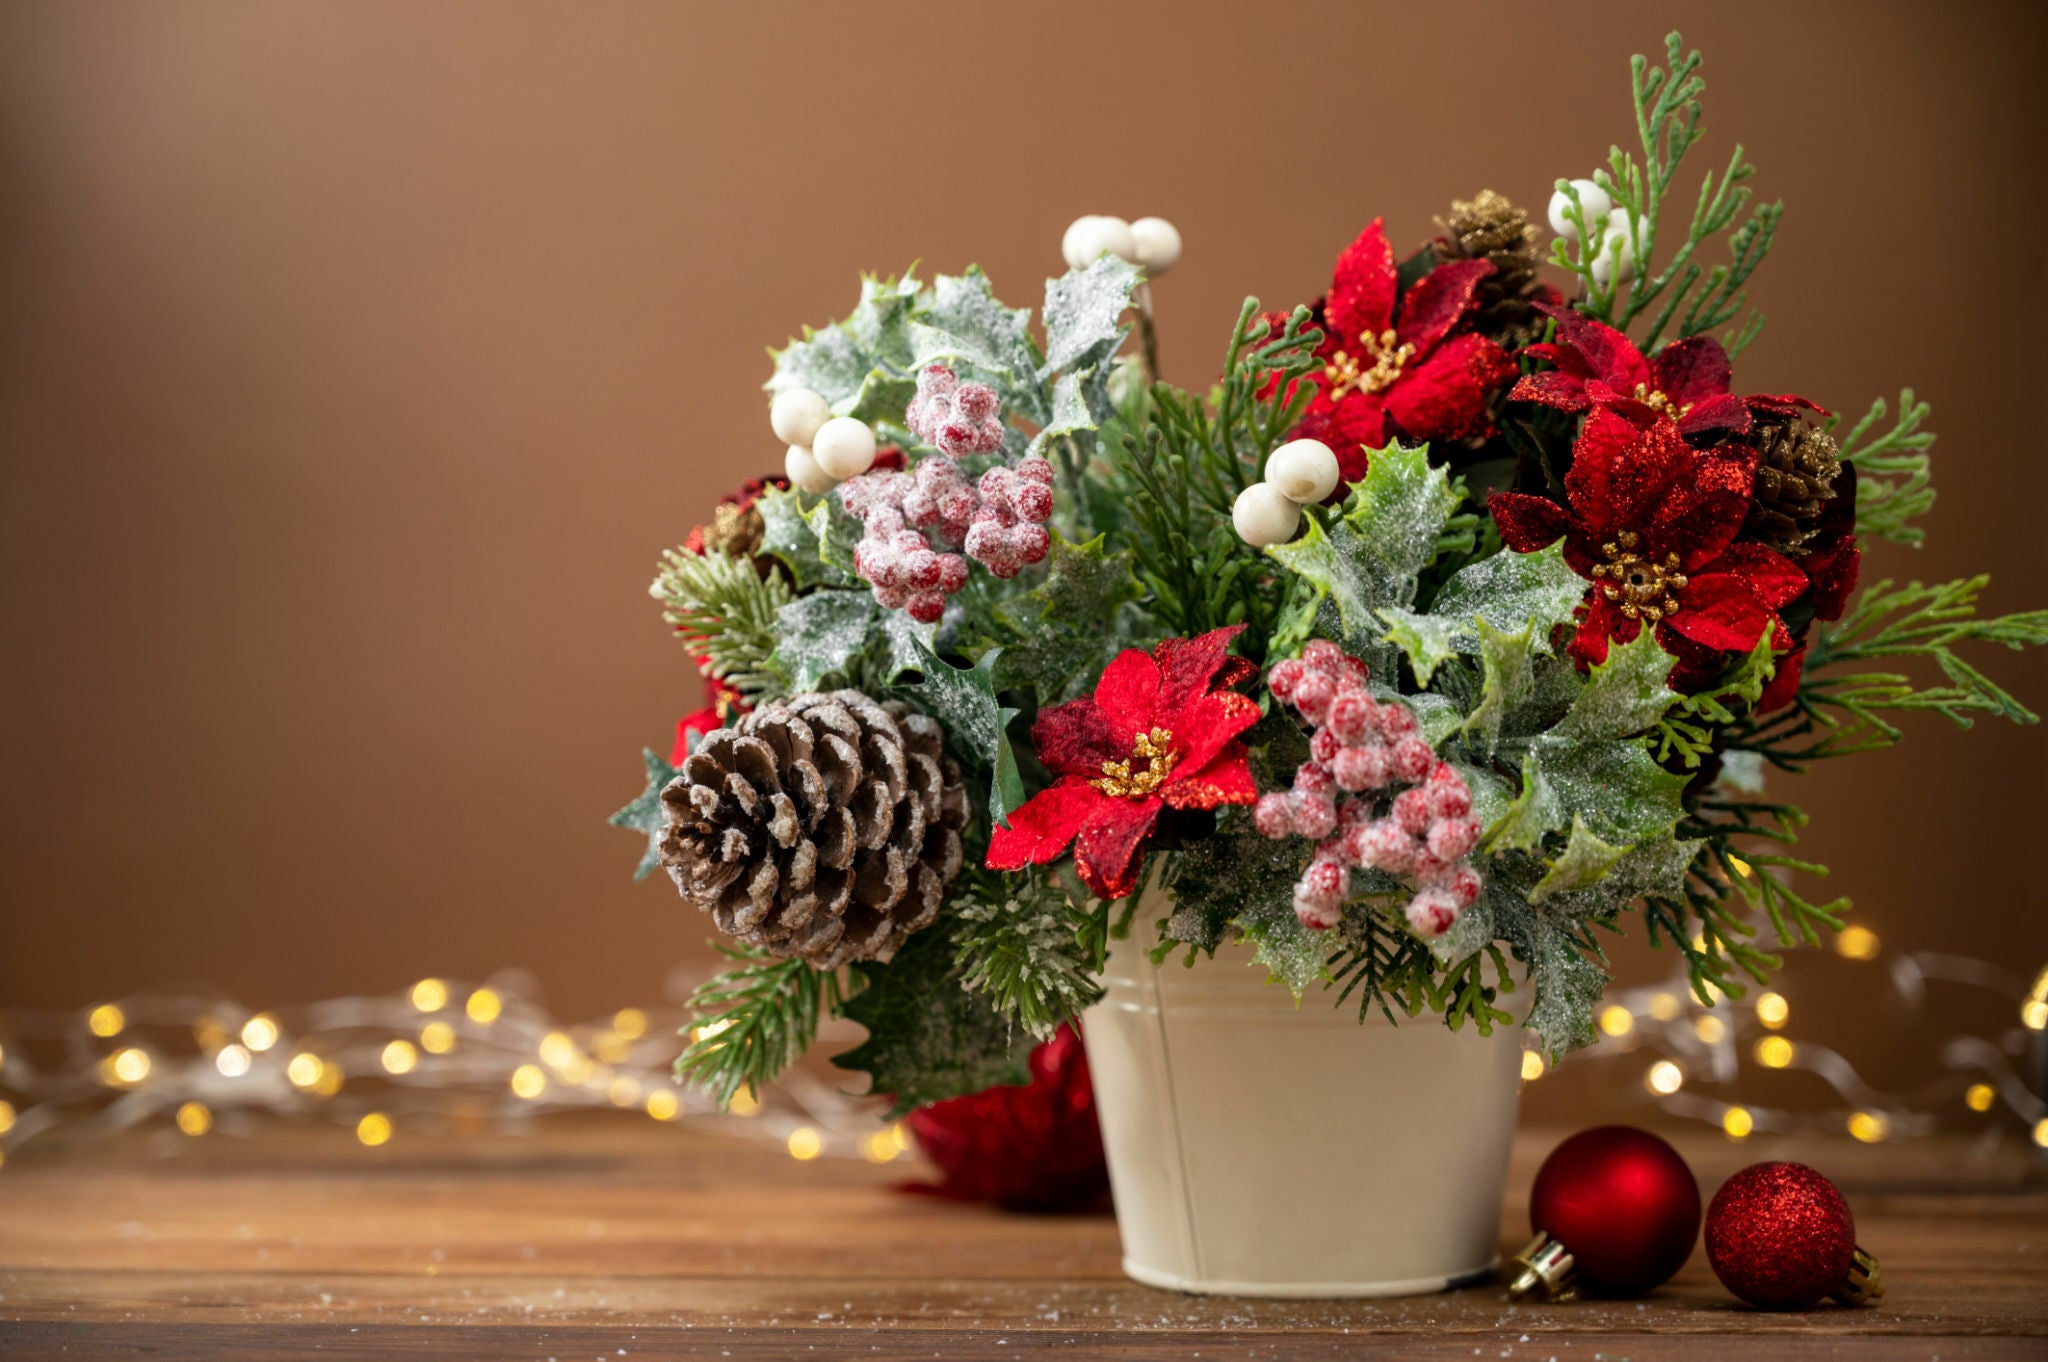 Christmas Flower Bouquets is the best Christmas Gift Ideas in Dubai